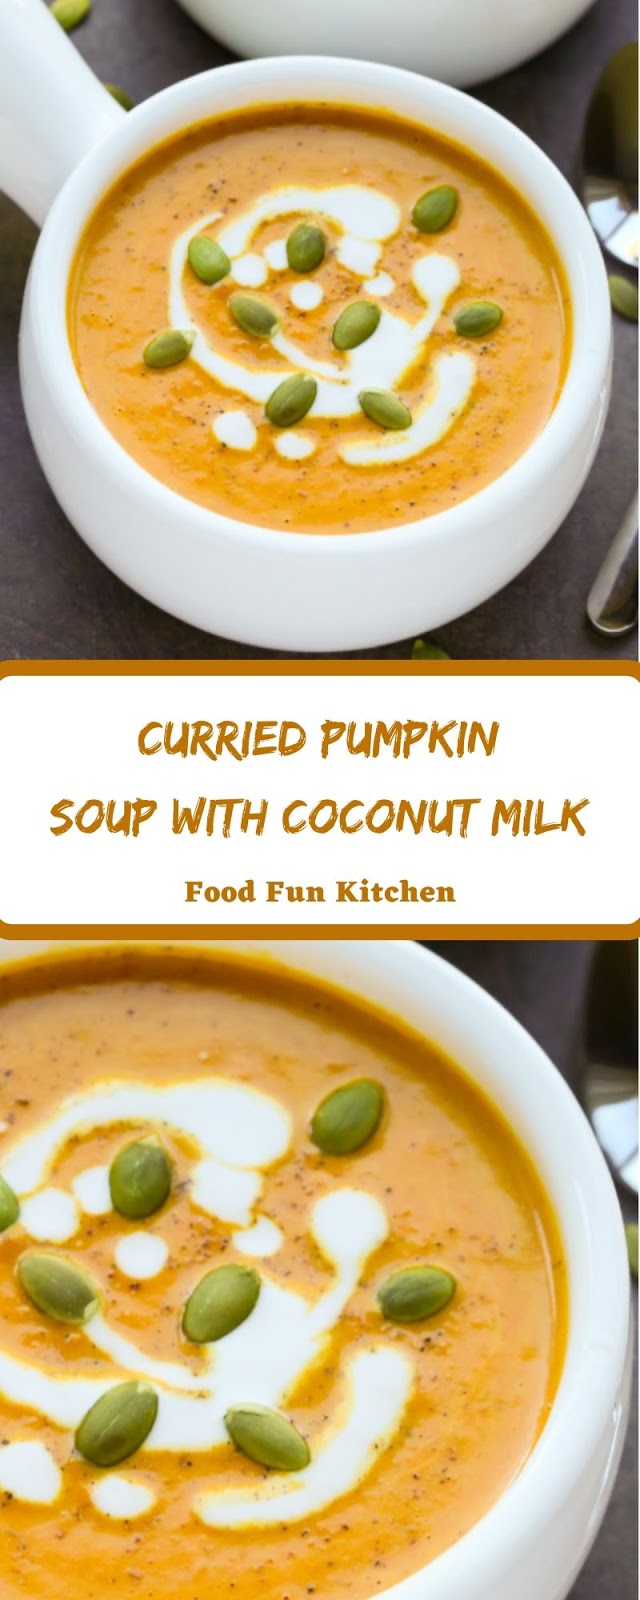 CURRIED PUMPKIN SOUP WITH COCONUT MILK